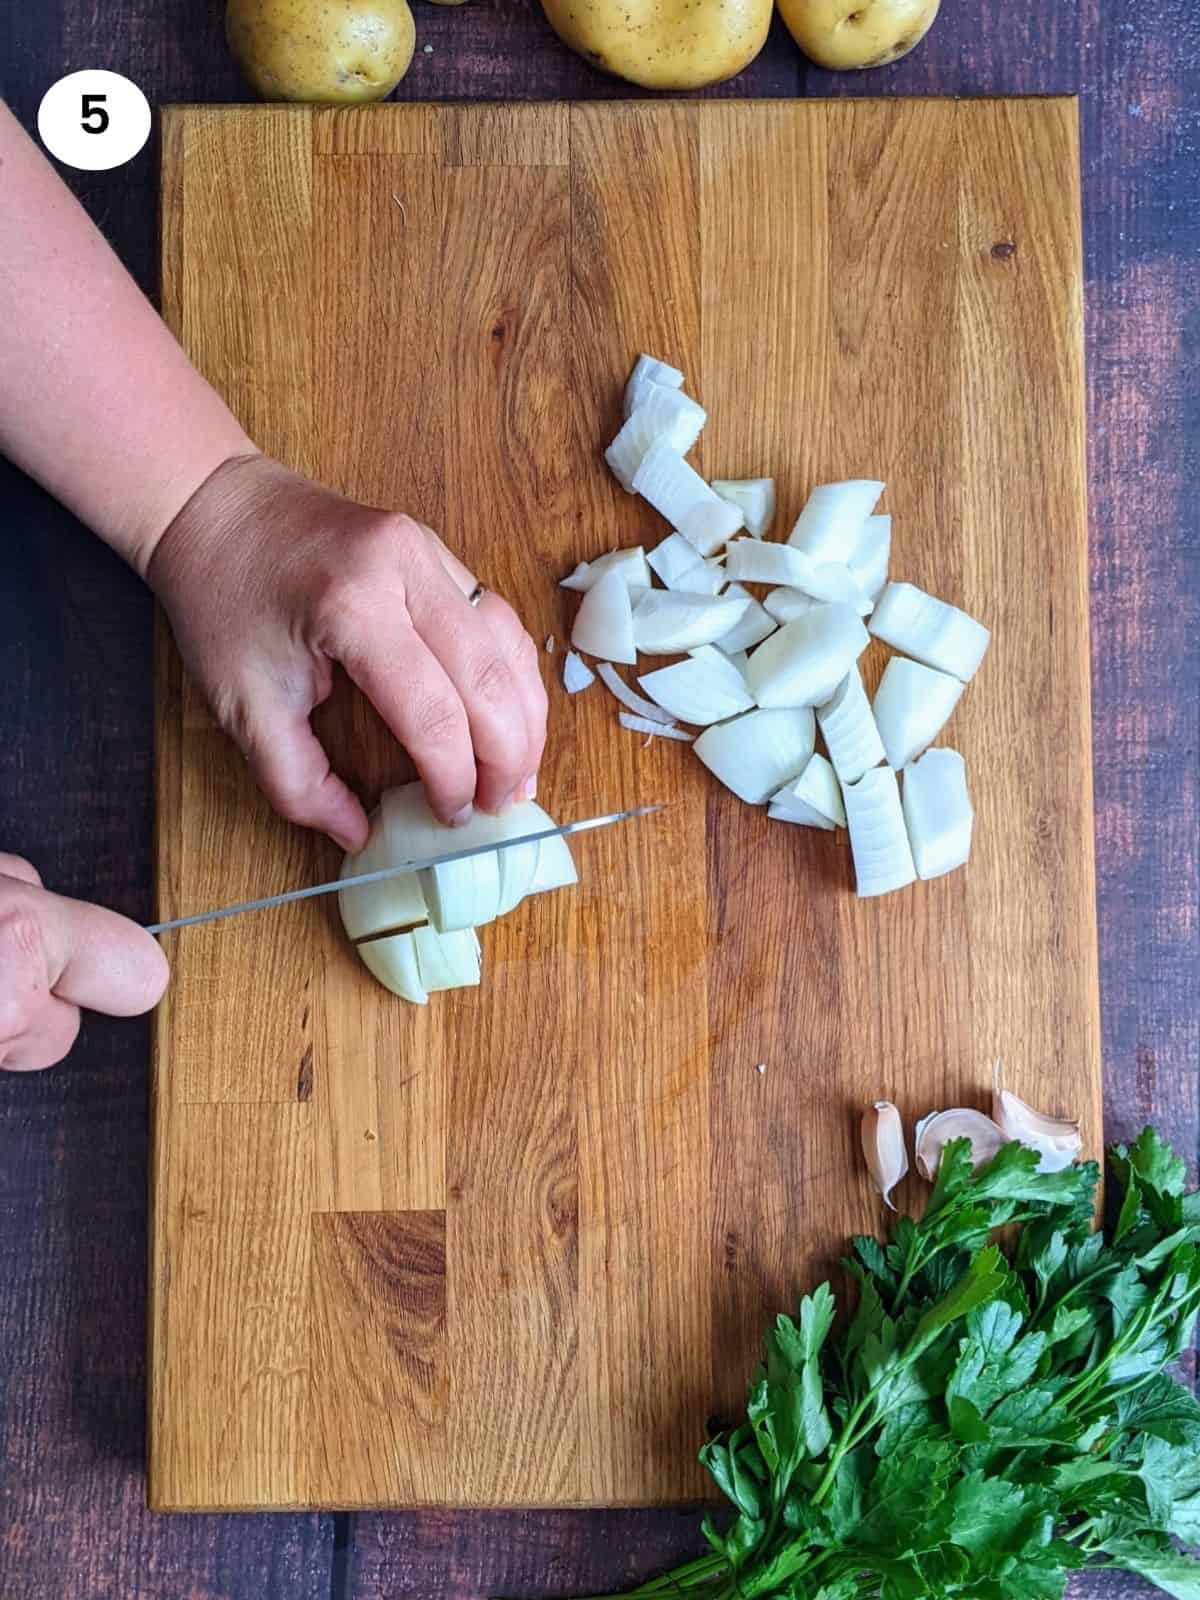 Cutting the onion into big cubes.